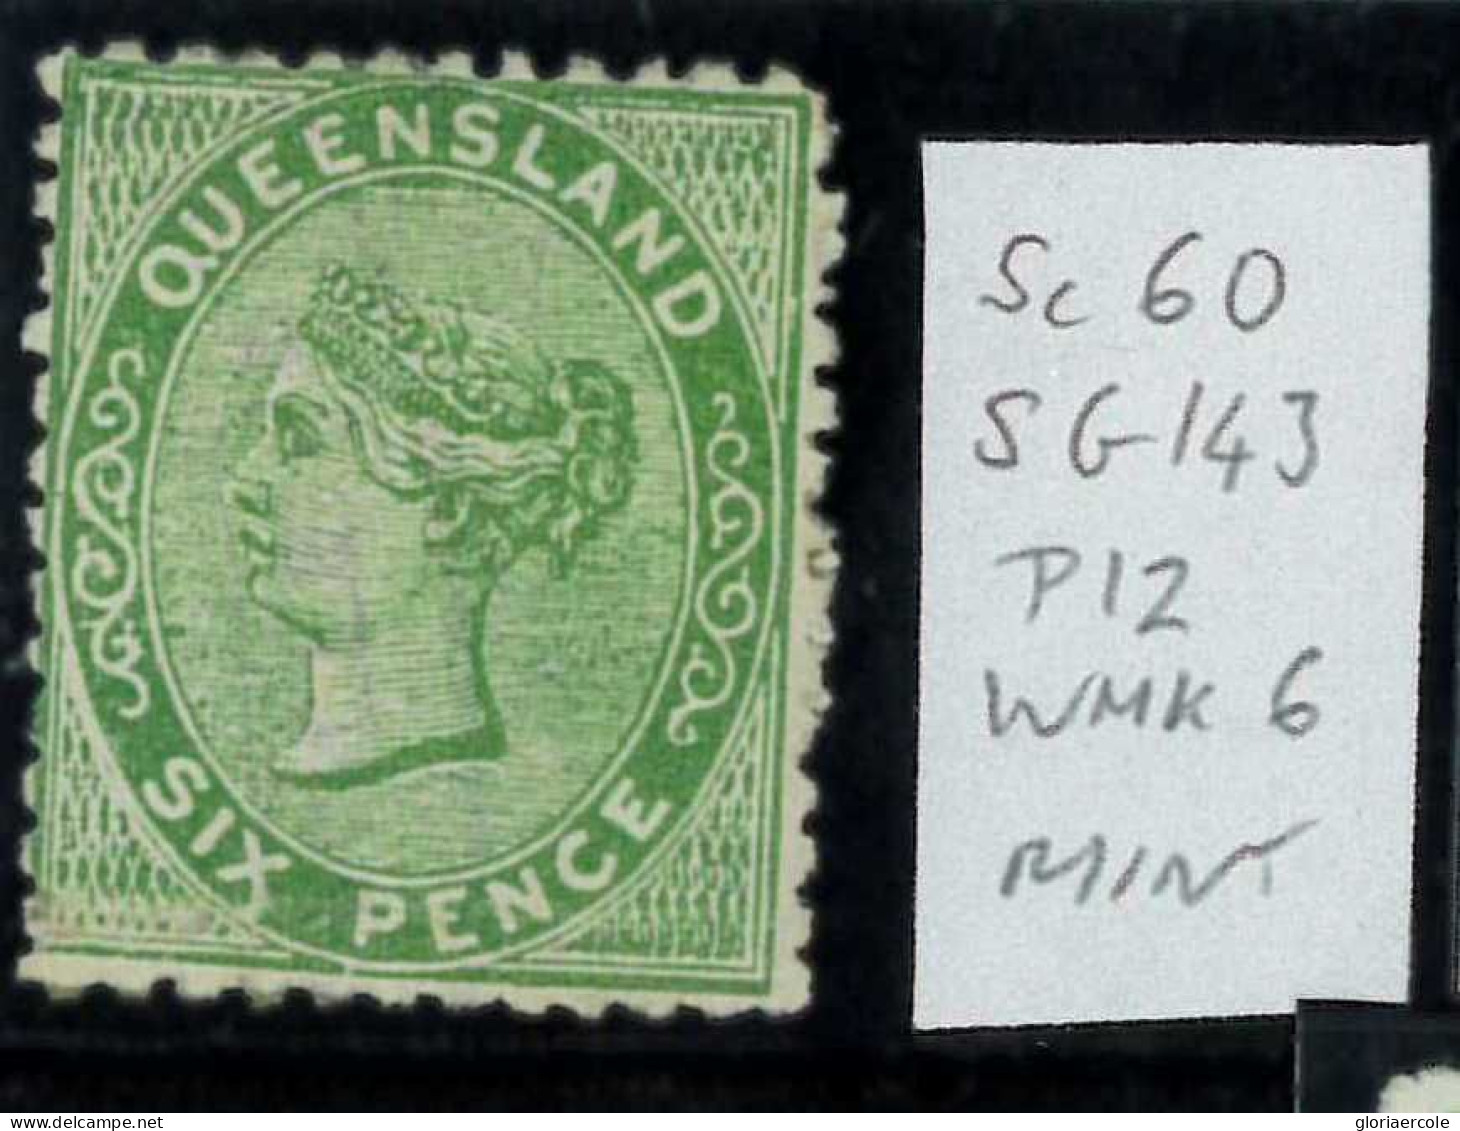 Aa5621a - Australia QUEENSLAND - STAMP - SG # 143 - Mint Lightly Hinged MLH - Mint Stamps